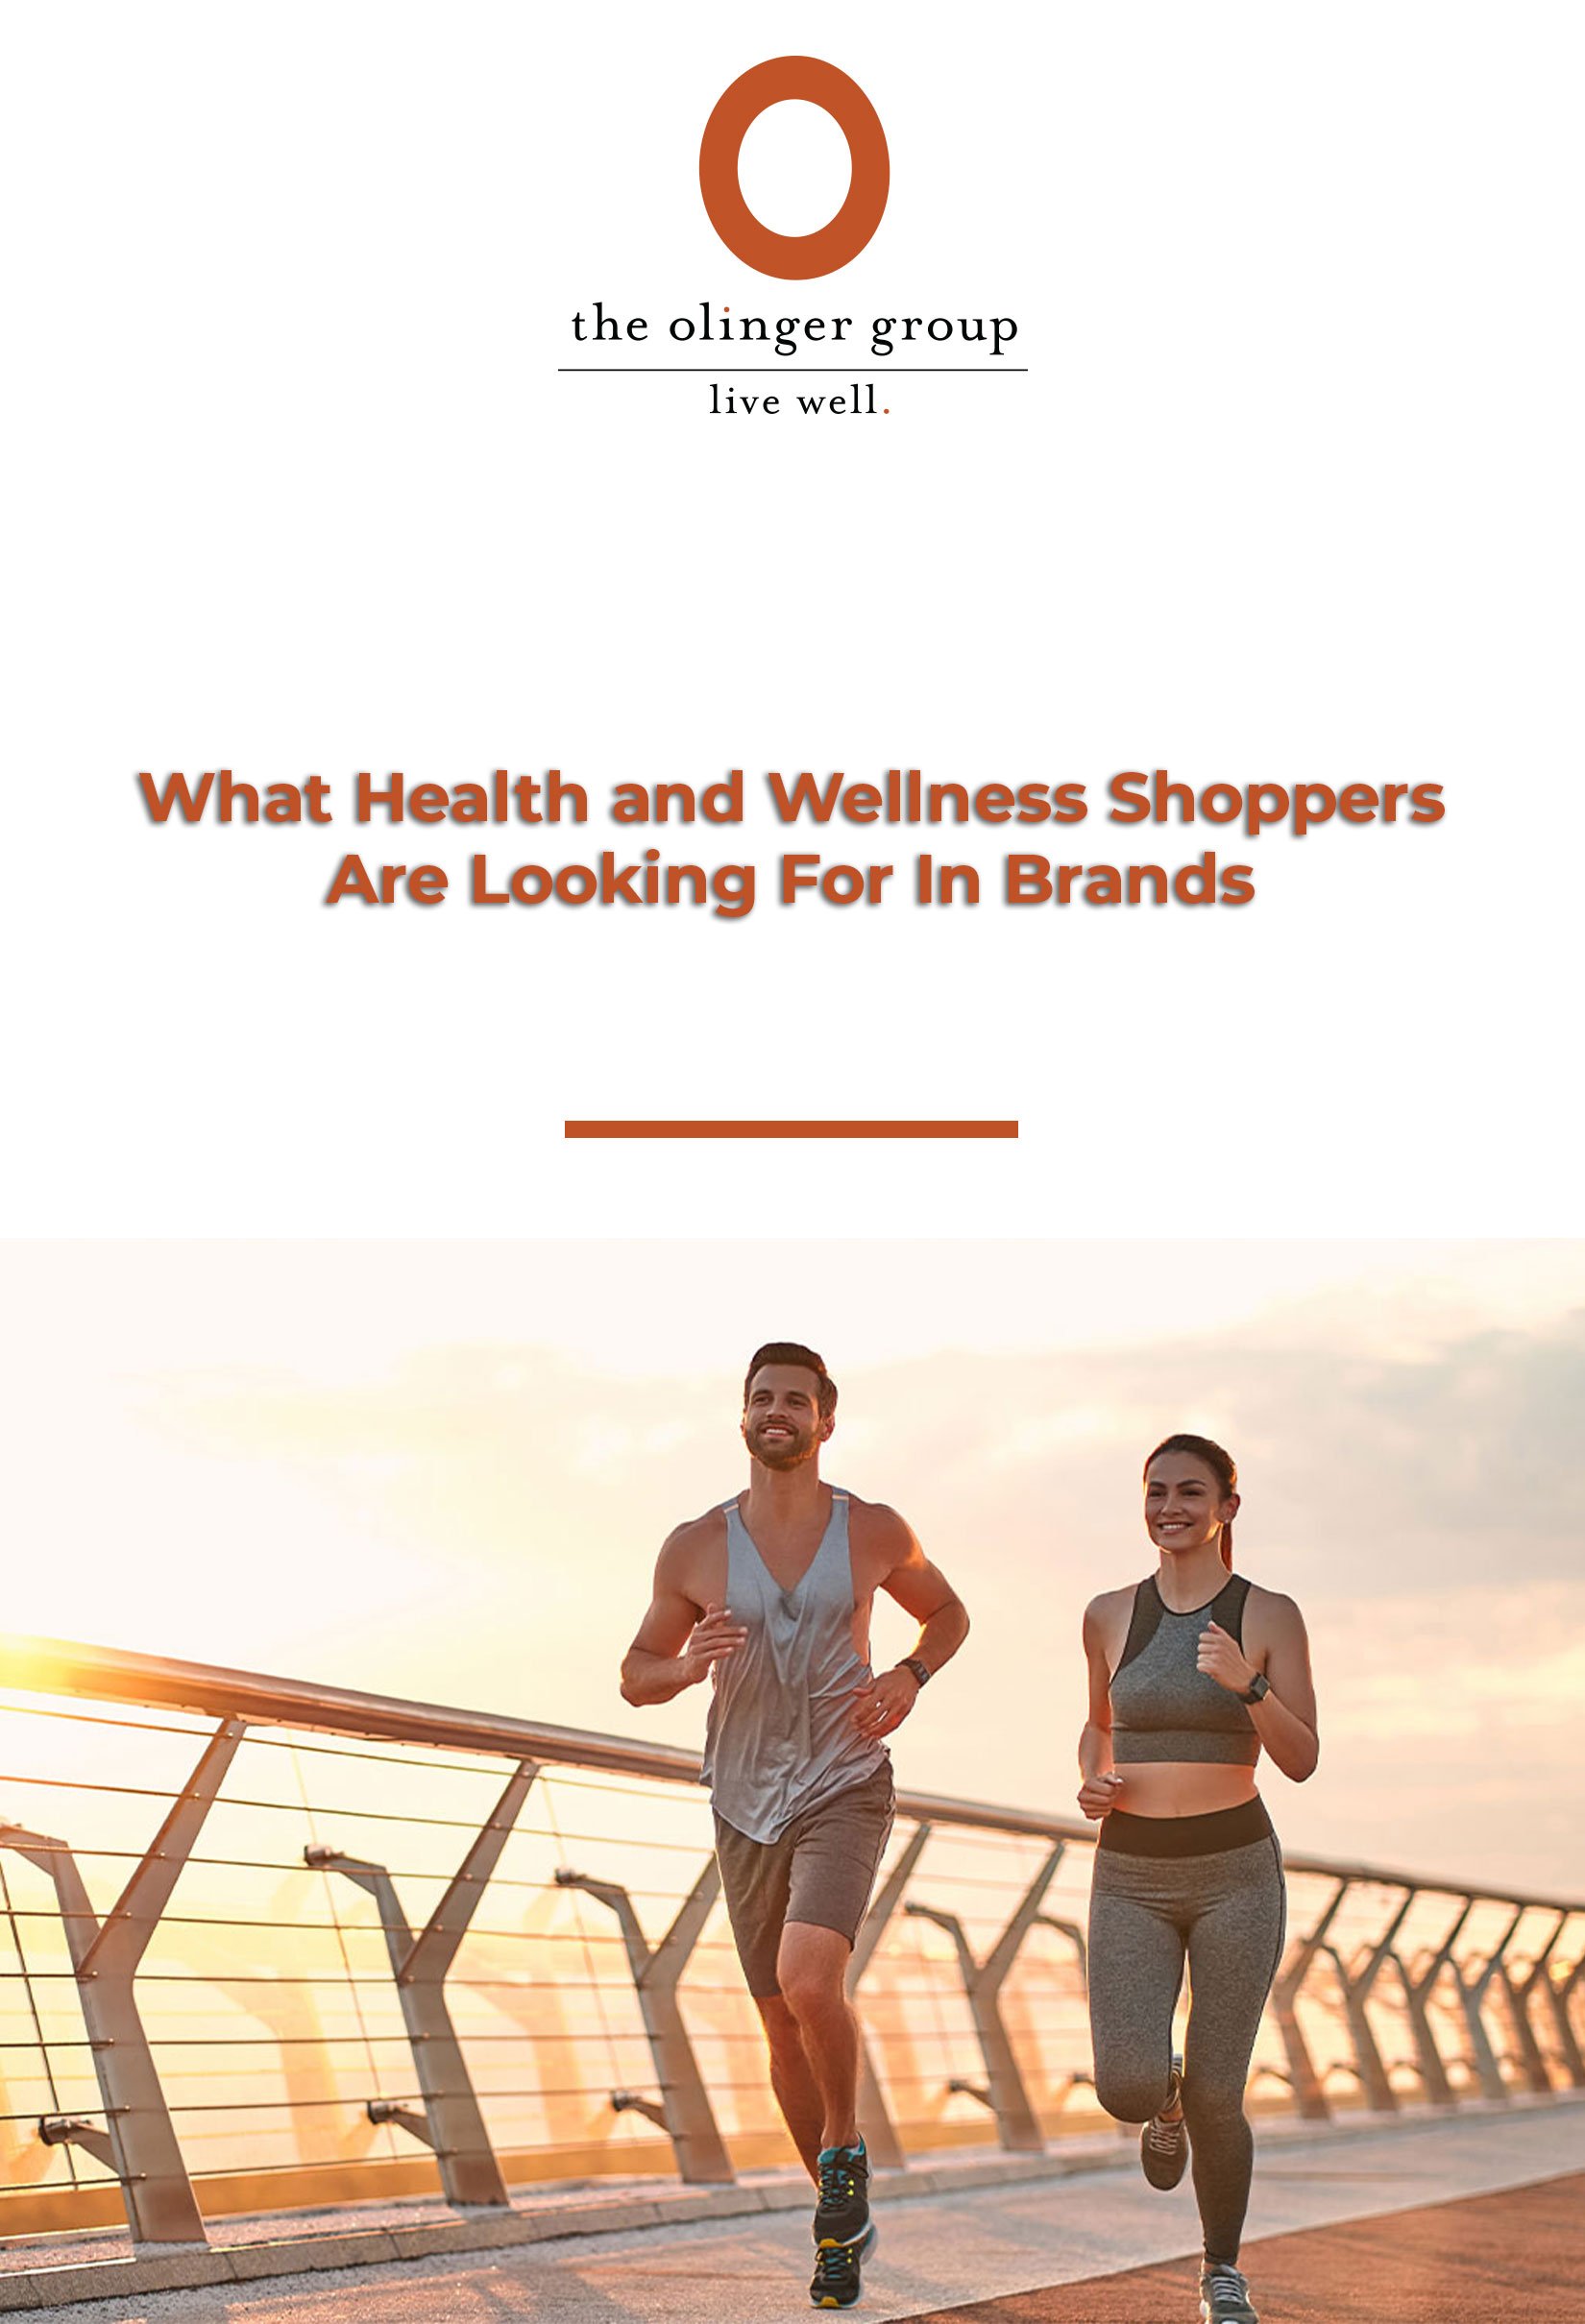 What-Health-and-Wellness-Shoppers-Are-Looking-For-In-Brands-1